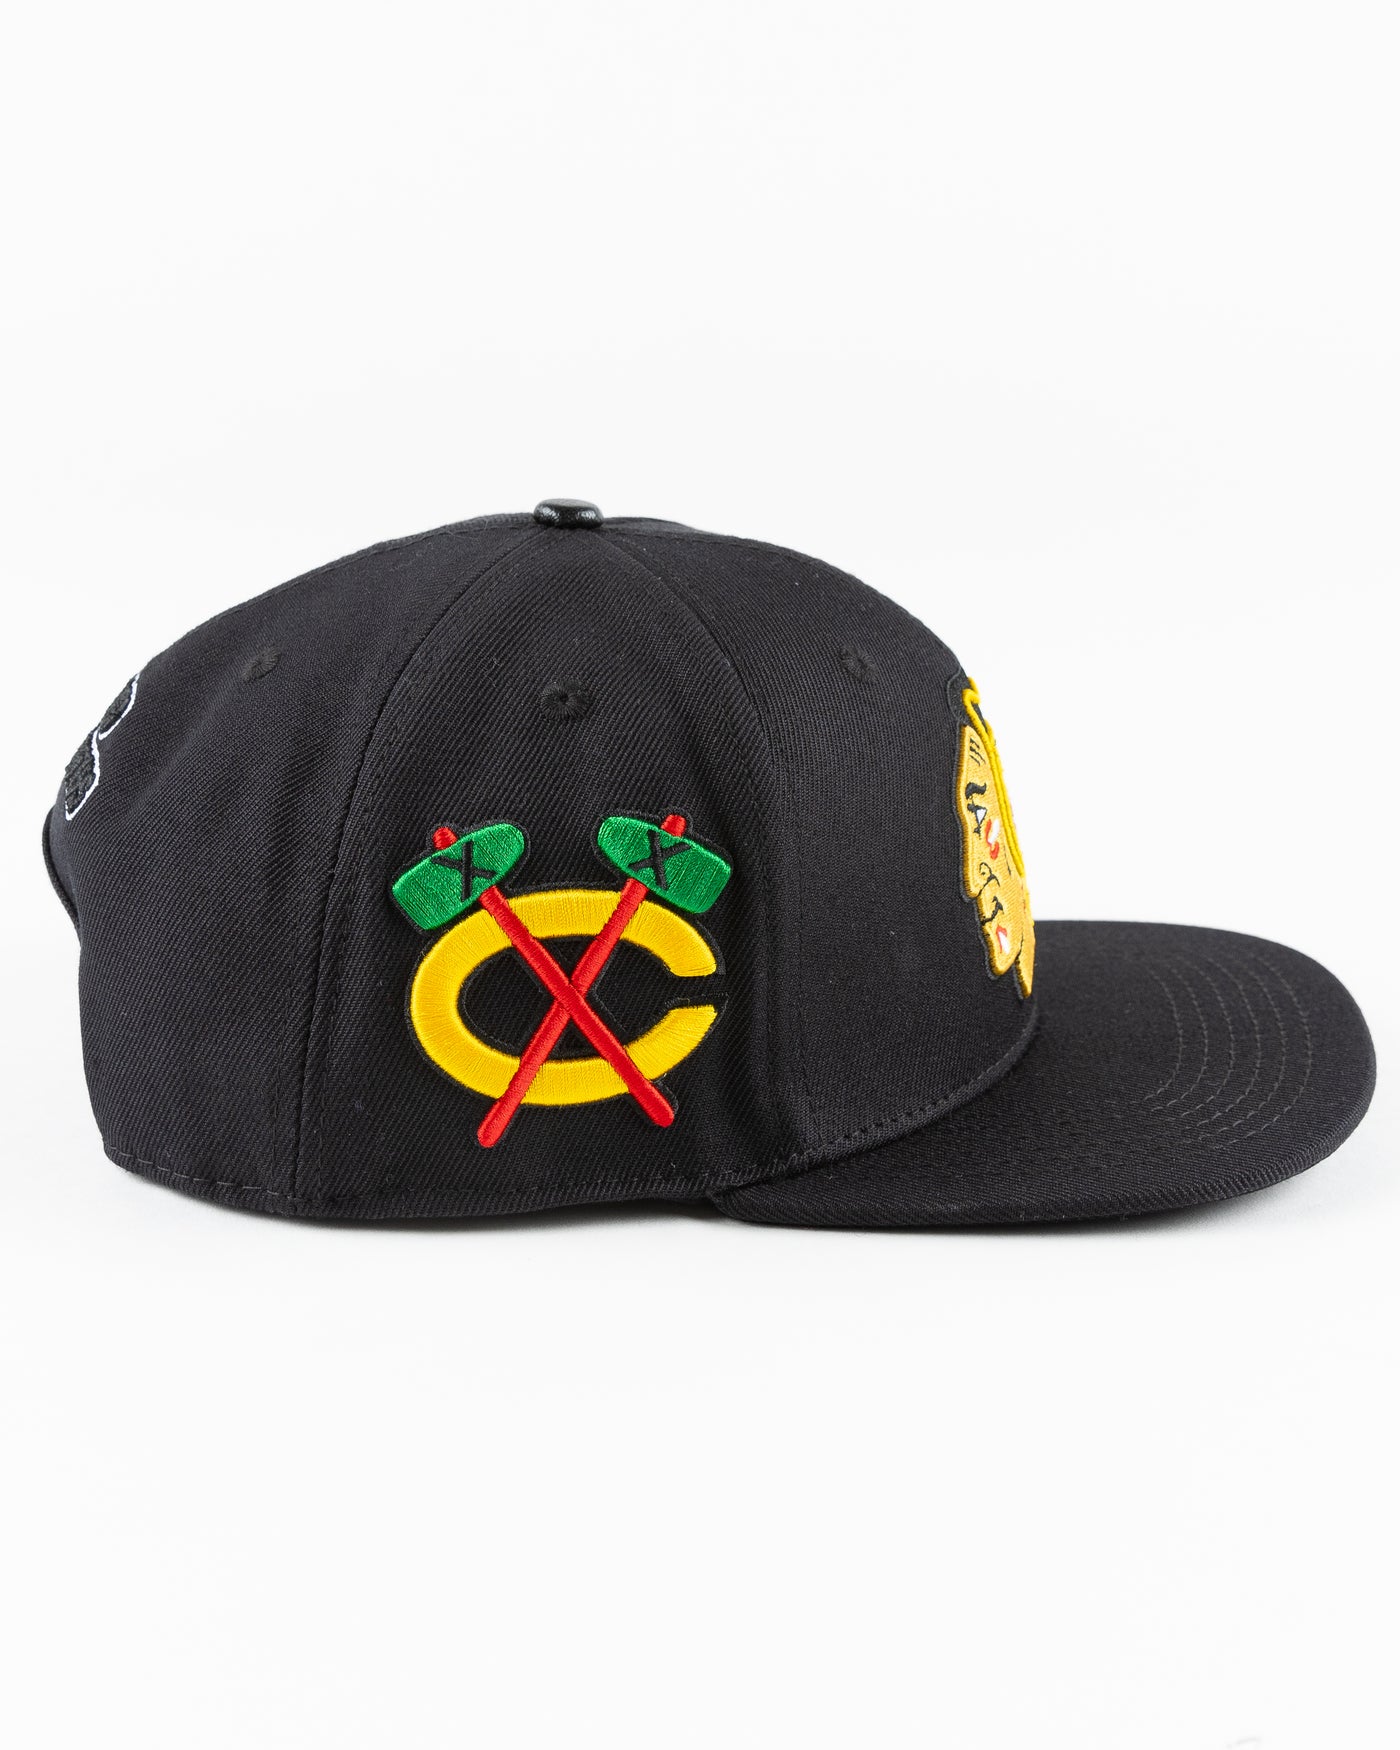 black Pro Standard wool snapback with Chicago Blackhawks embroidered logos on front, side and back - right side lay flat